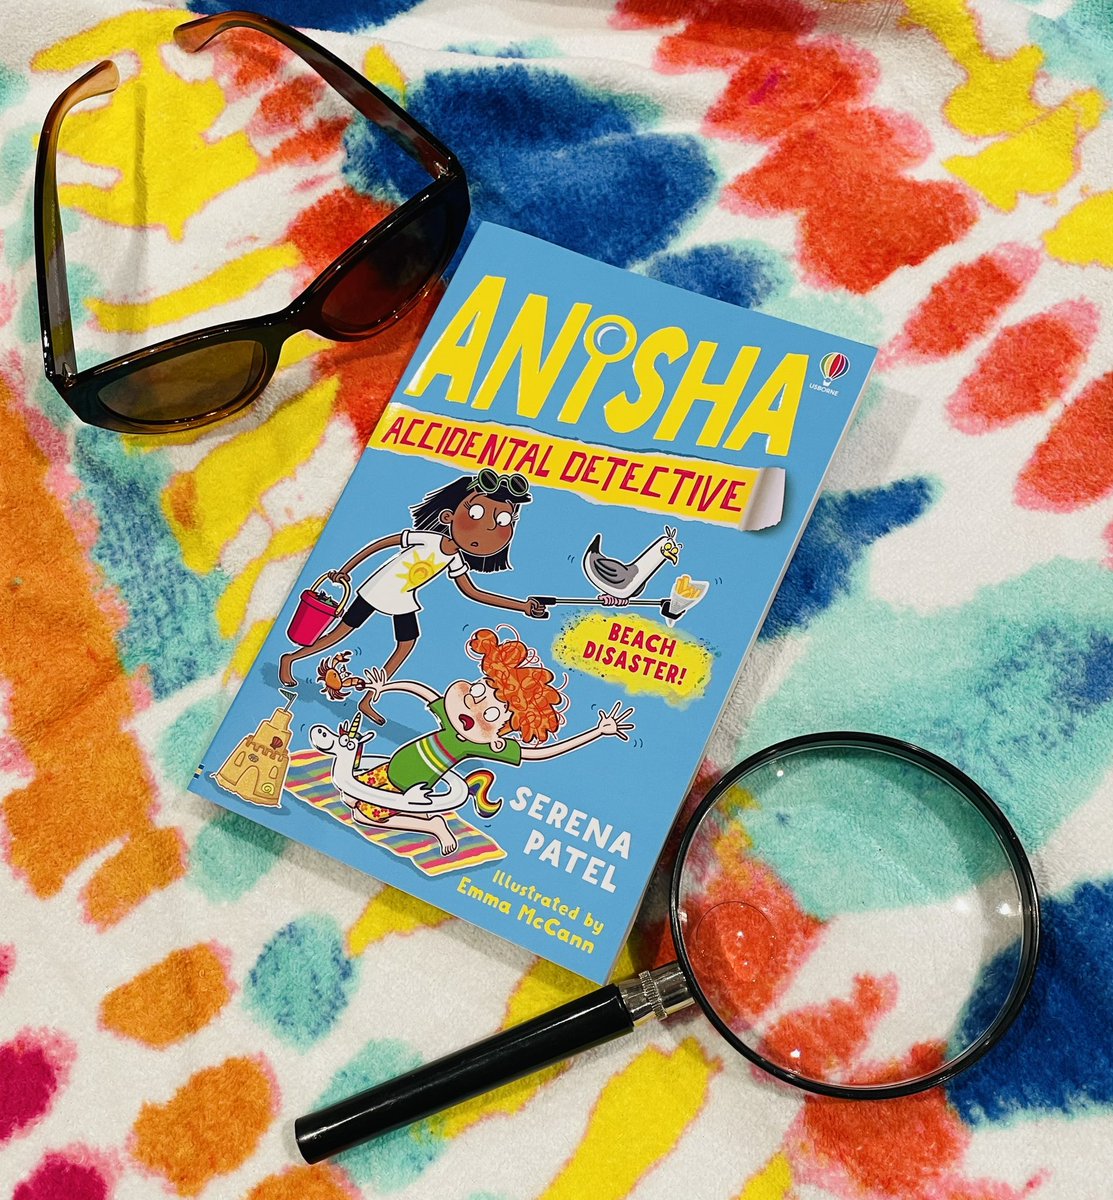 It’s finally publication week! To celebrate I’d like to offer a signed copy of Beach disaster to two lucky readers. Please like and retweet to enter. I’ll announce winners on Thursday. 🔎🍦⛱️😎 @cooliobeanz @Usborne